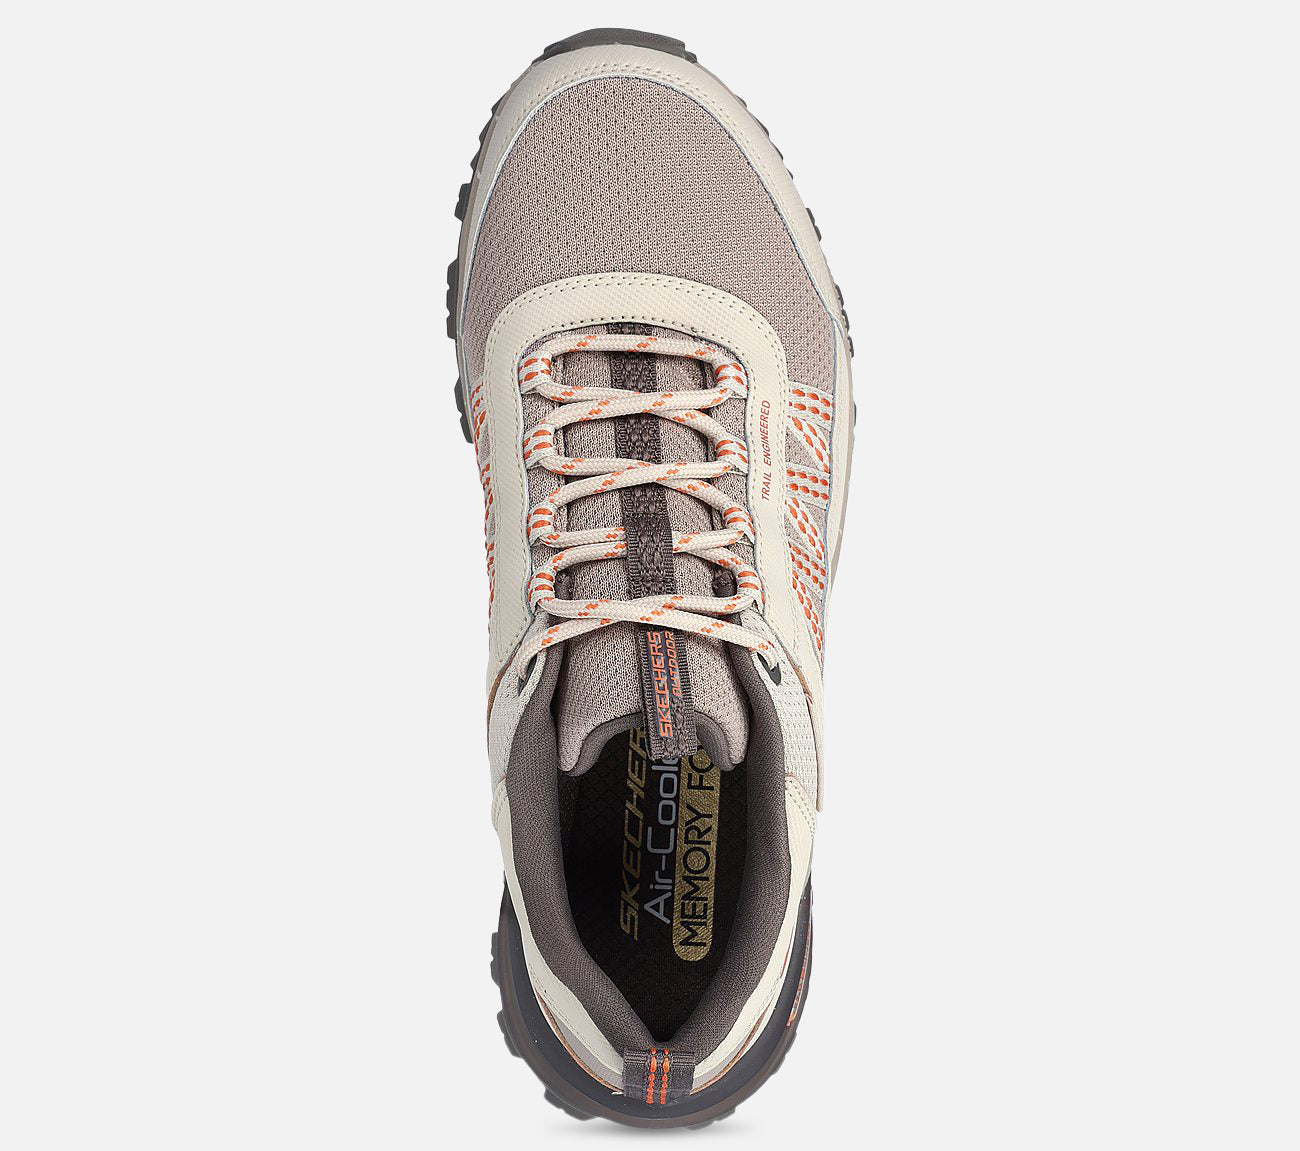 Max Protect Legacy - Water Repellent Shoe Skechers